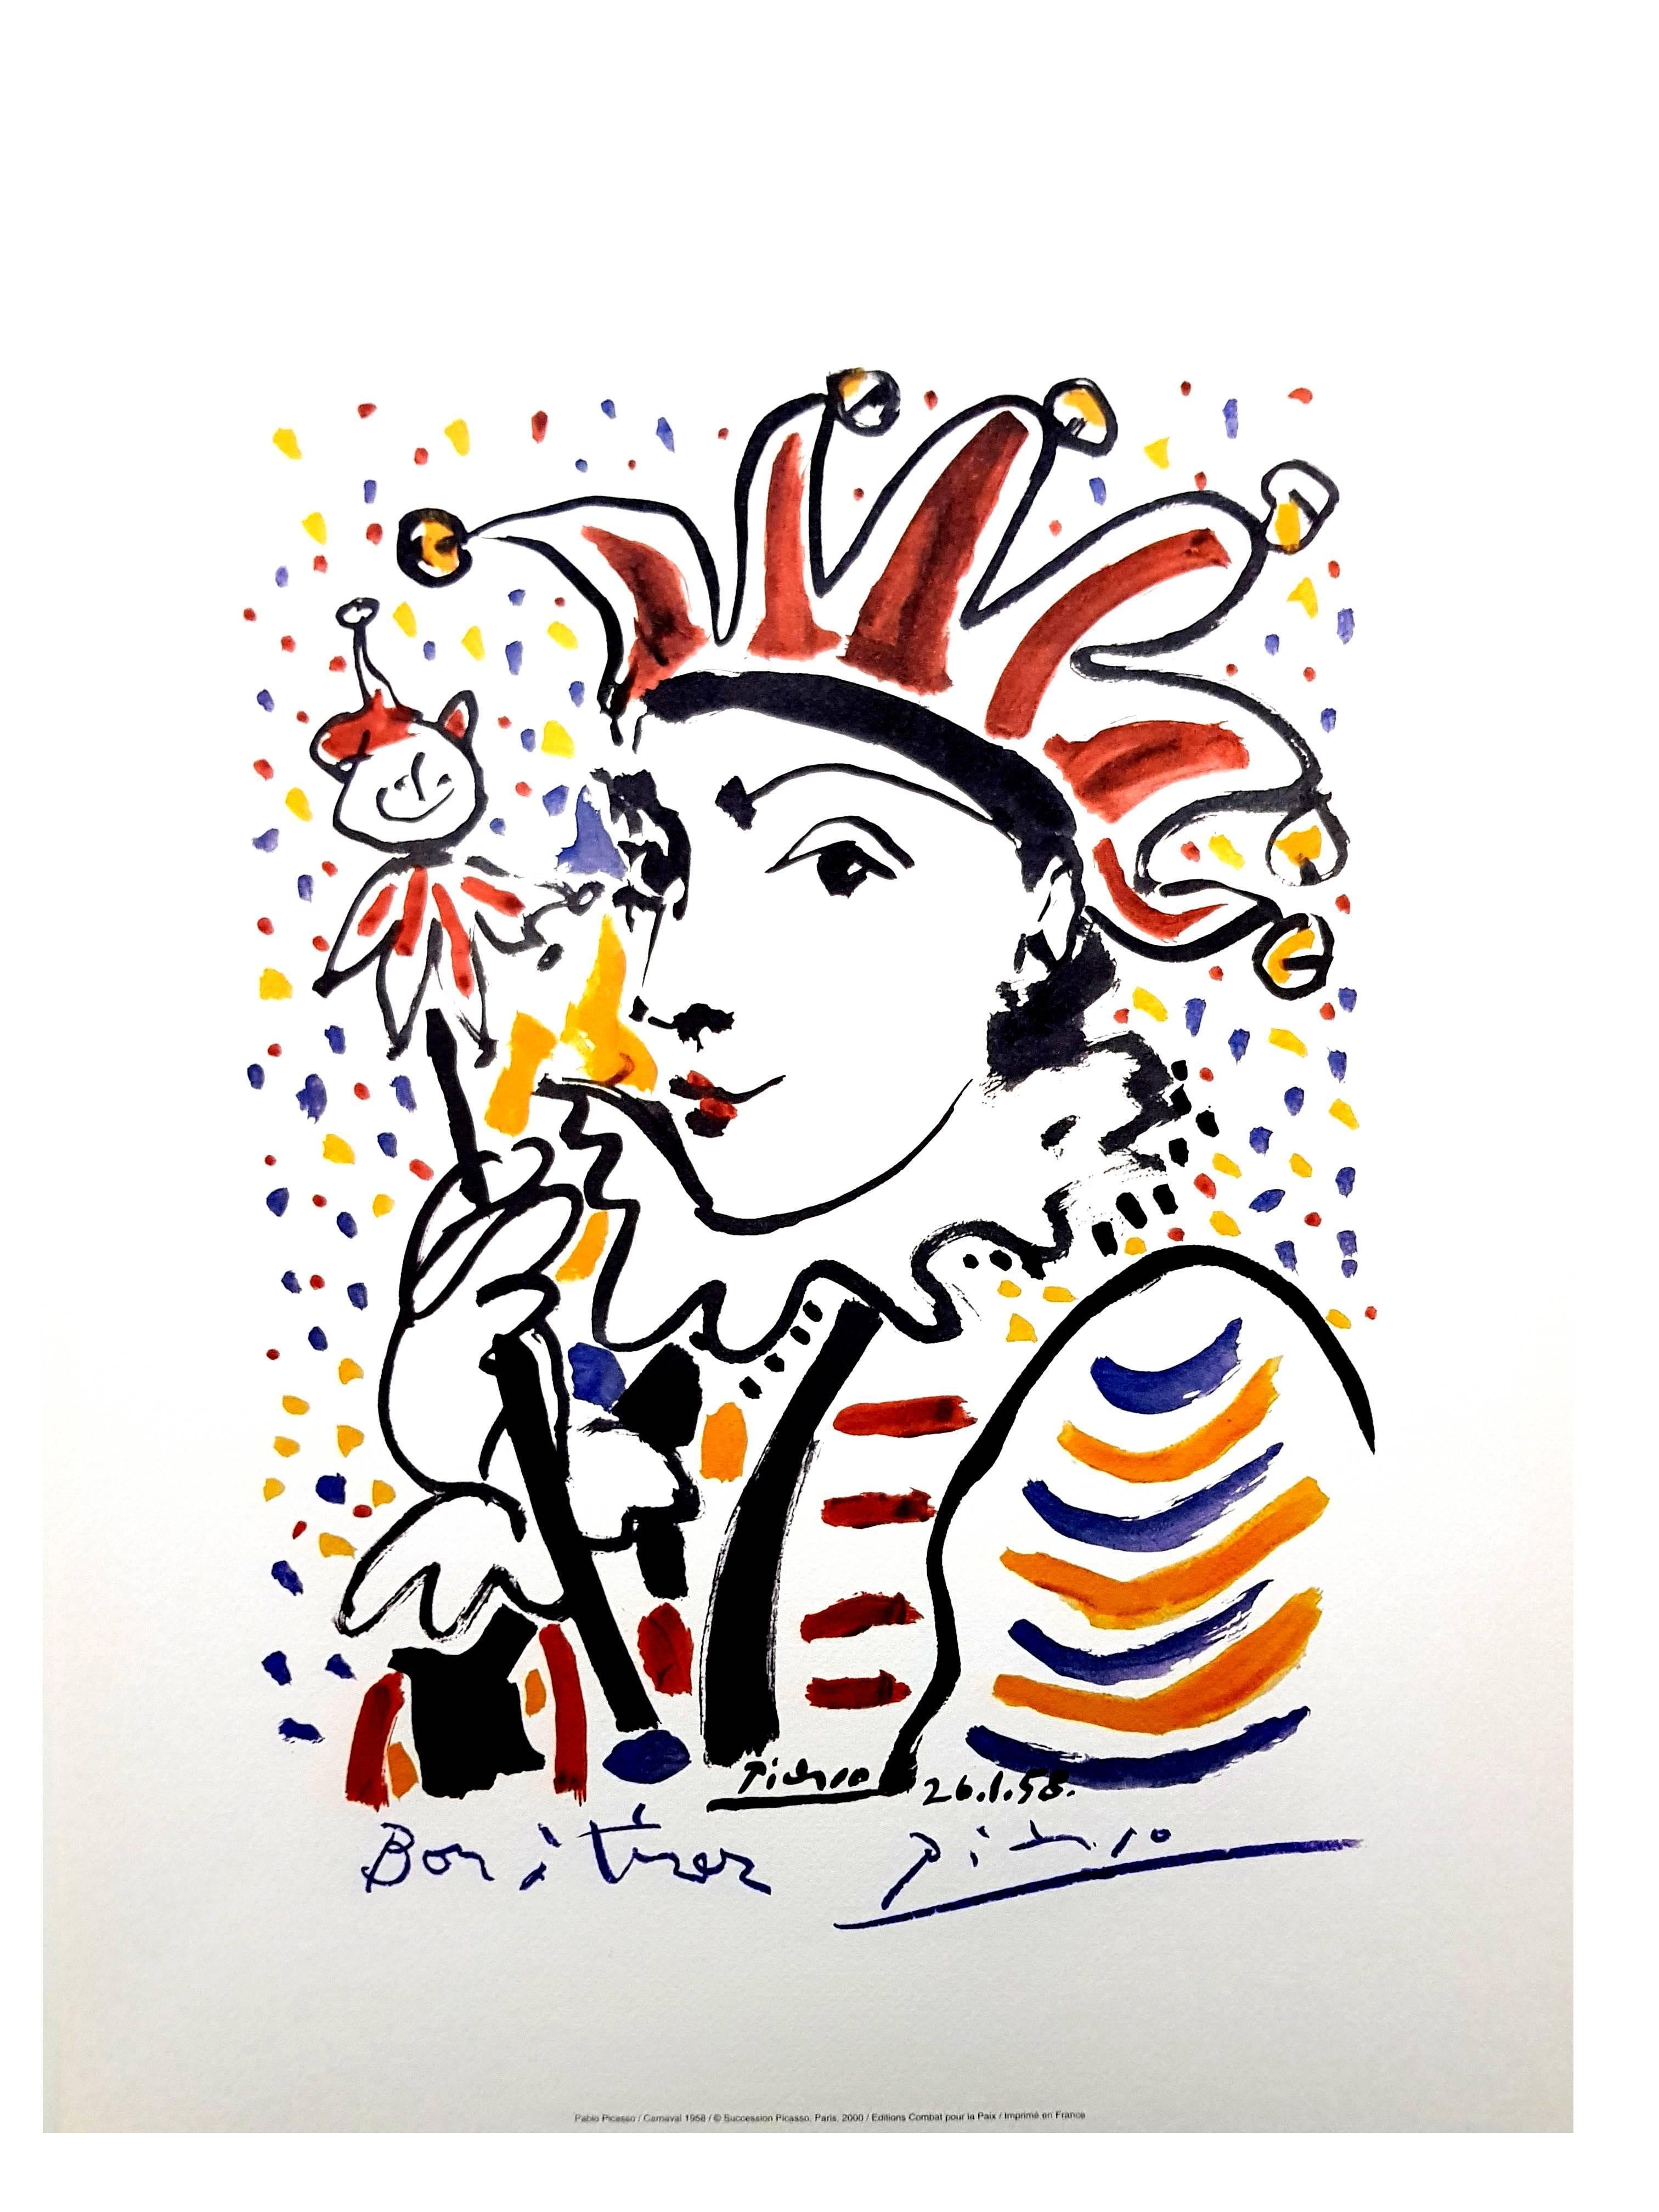 After PABLO PICASSO (1881-1973)
Carnaval
Dimensions: 50 x 40 cm
Signed and dated in the plate
Color lithograph on Velin D'Arches realized from a drawing
Edition Succession Picasso, Paris (posthumous reproductive edition)
Editions de la Paix

Picasso